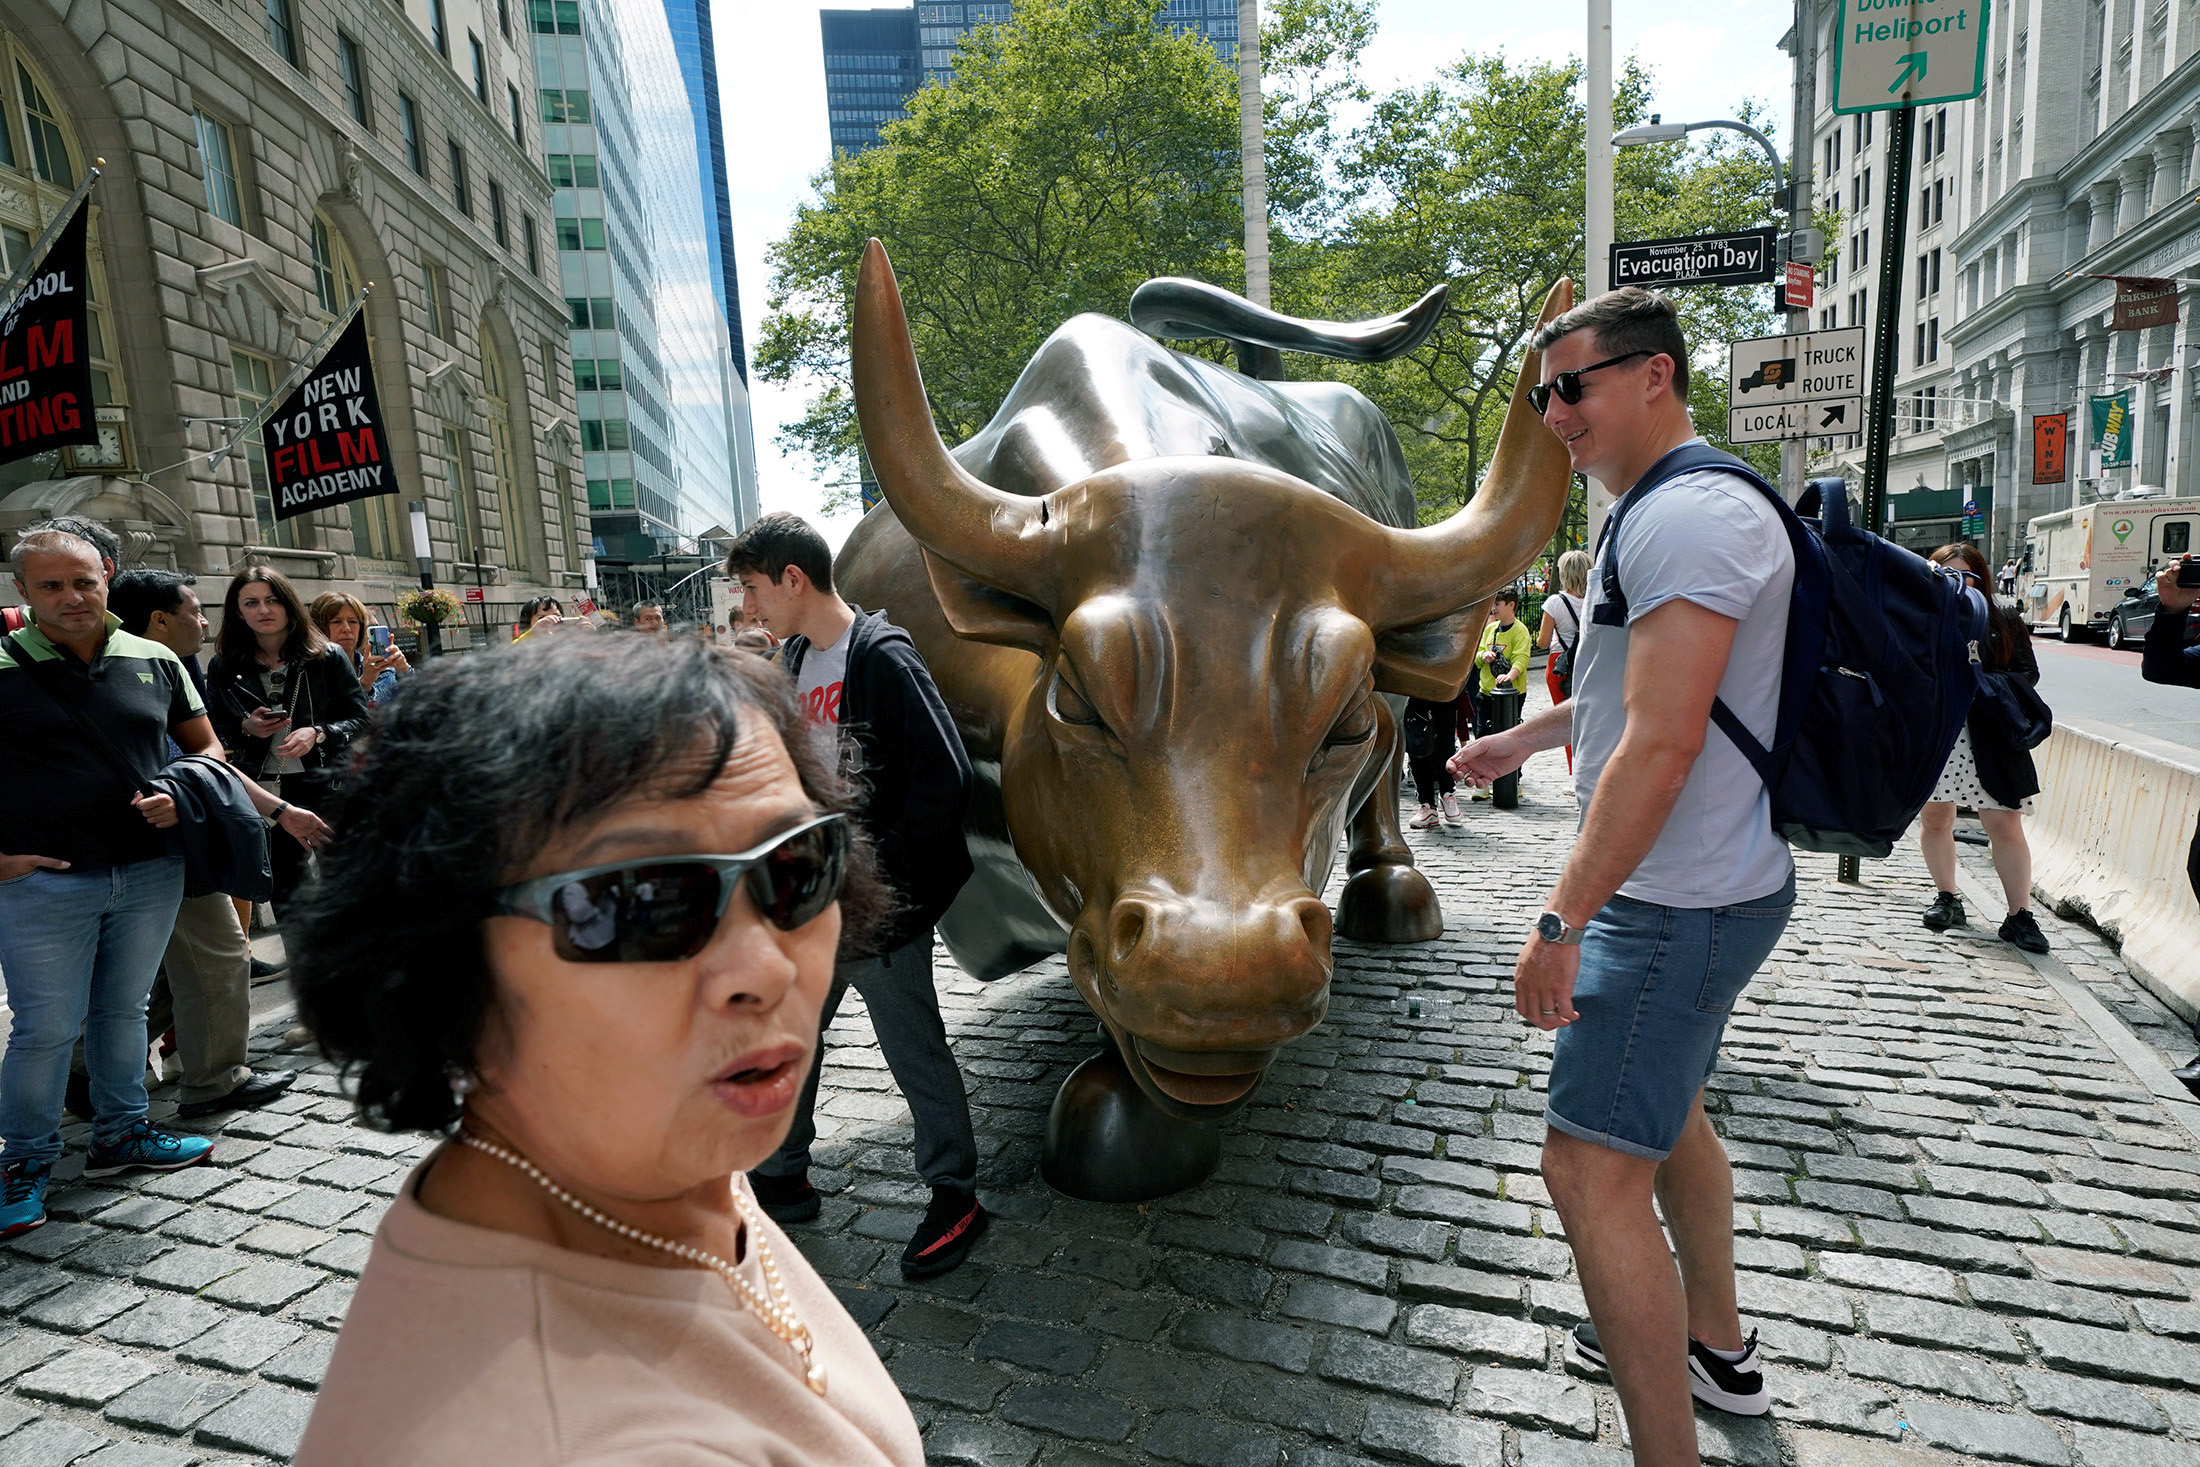 PHOTO: Pedestrians view the damage, visible near the base of one of its horns, to the iconic bronze Charging Bull statue on Wall Street in New York, Sept. 8, 2019.